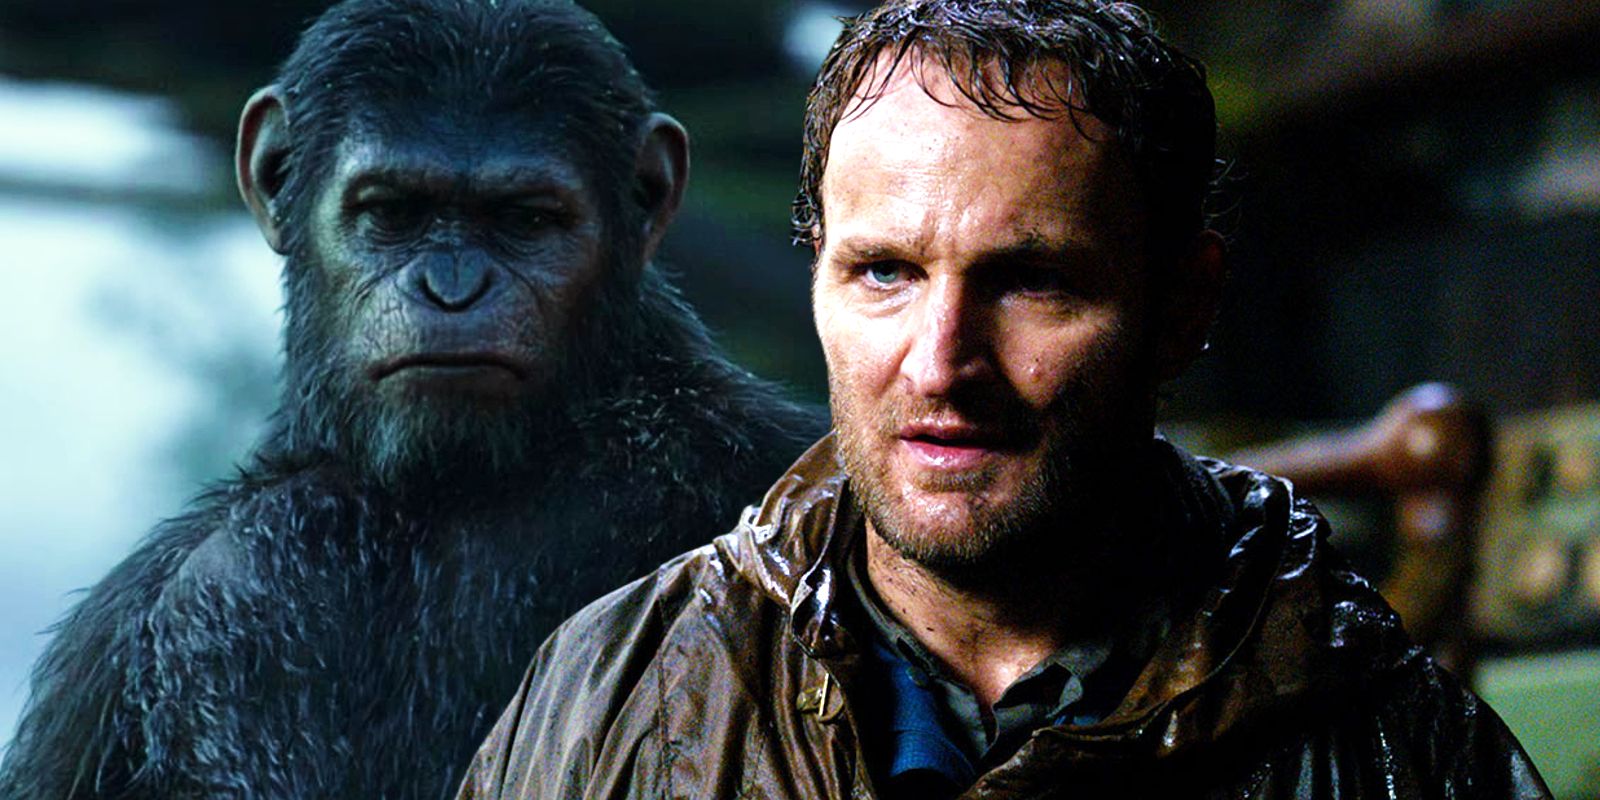 Caesar and Malcolm looiking sideways in Dawn of the Planet of the Apes